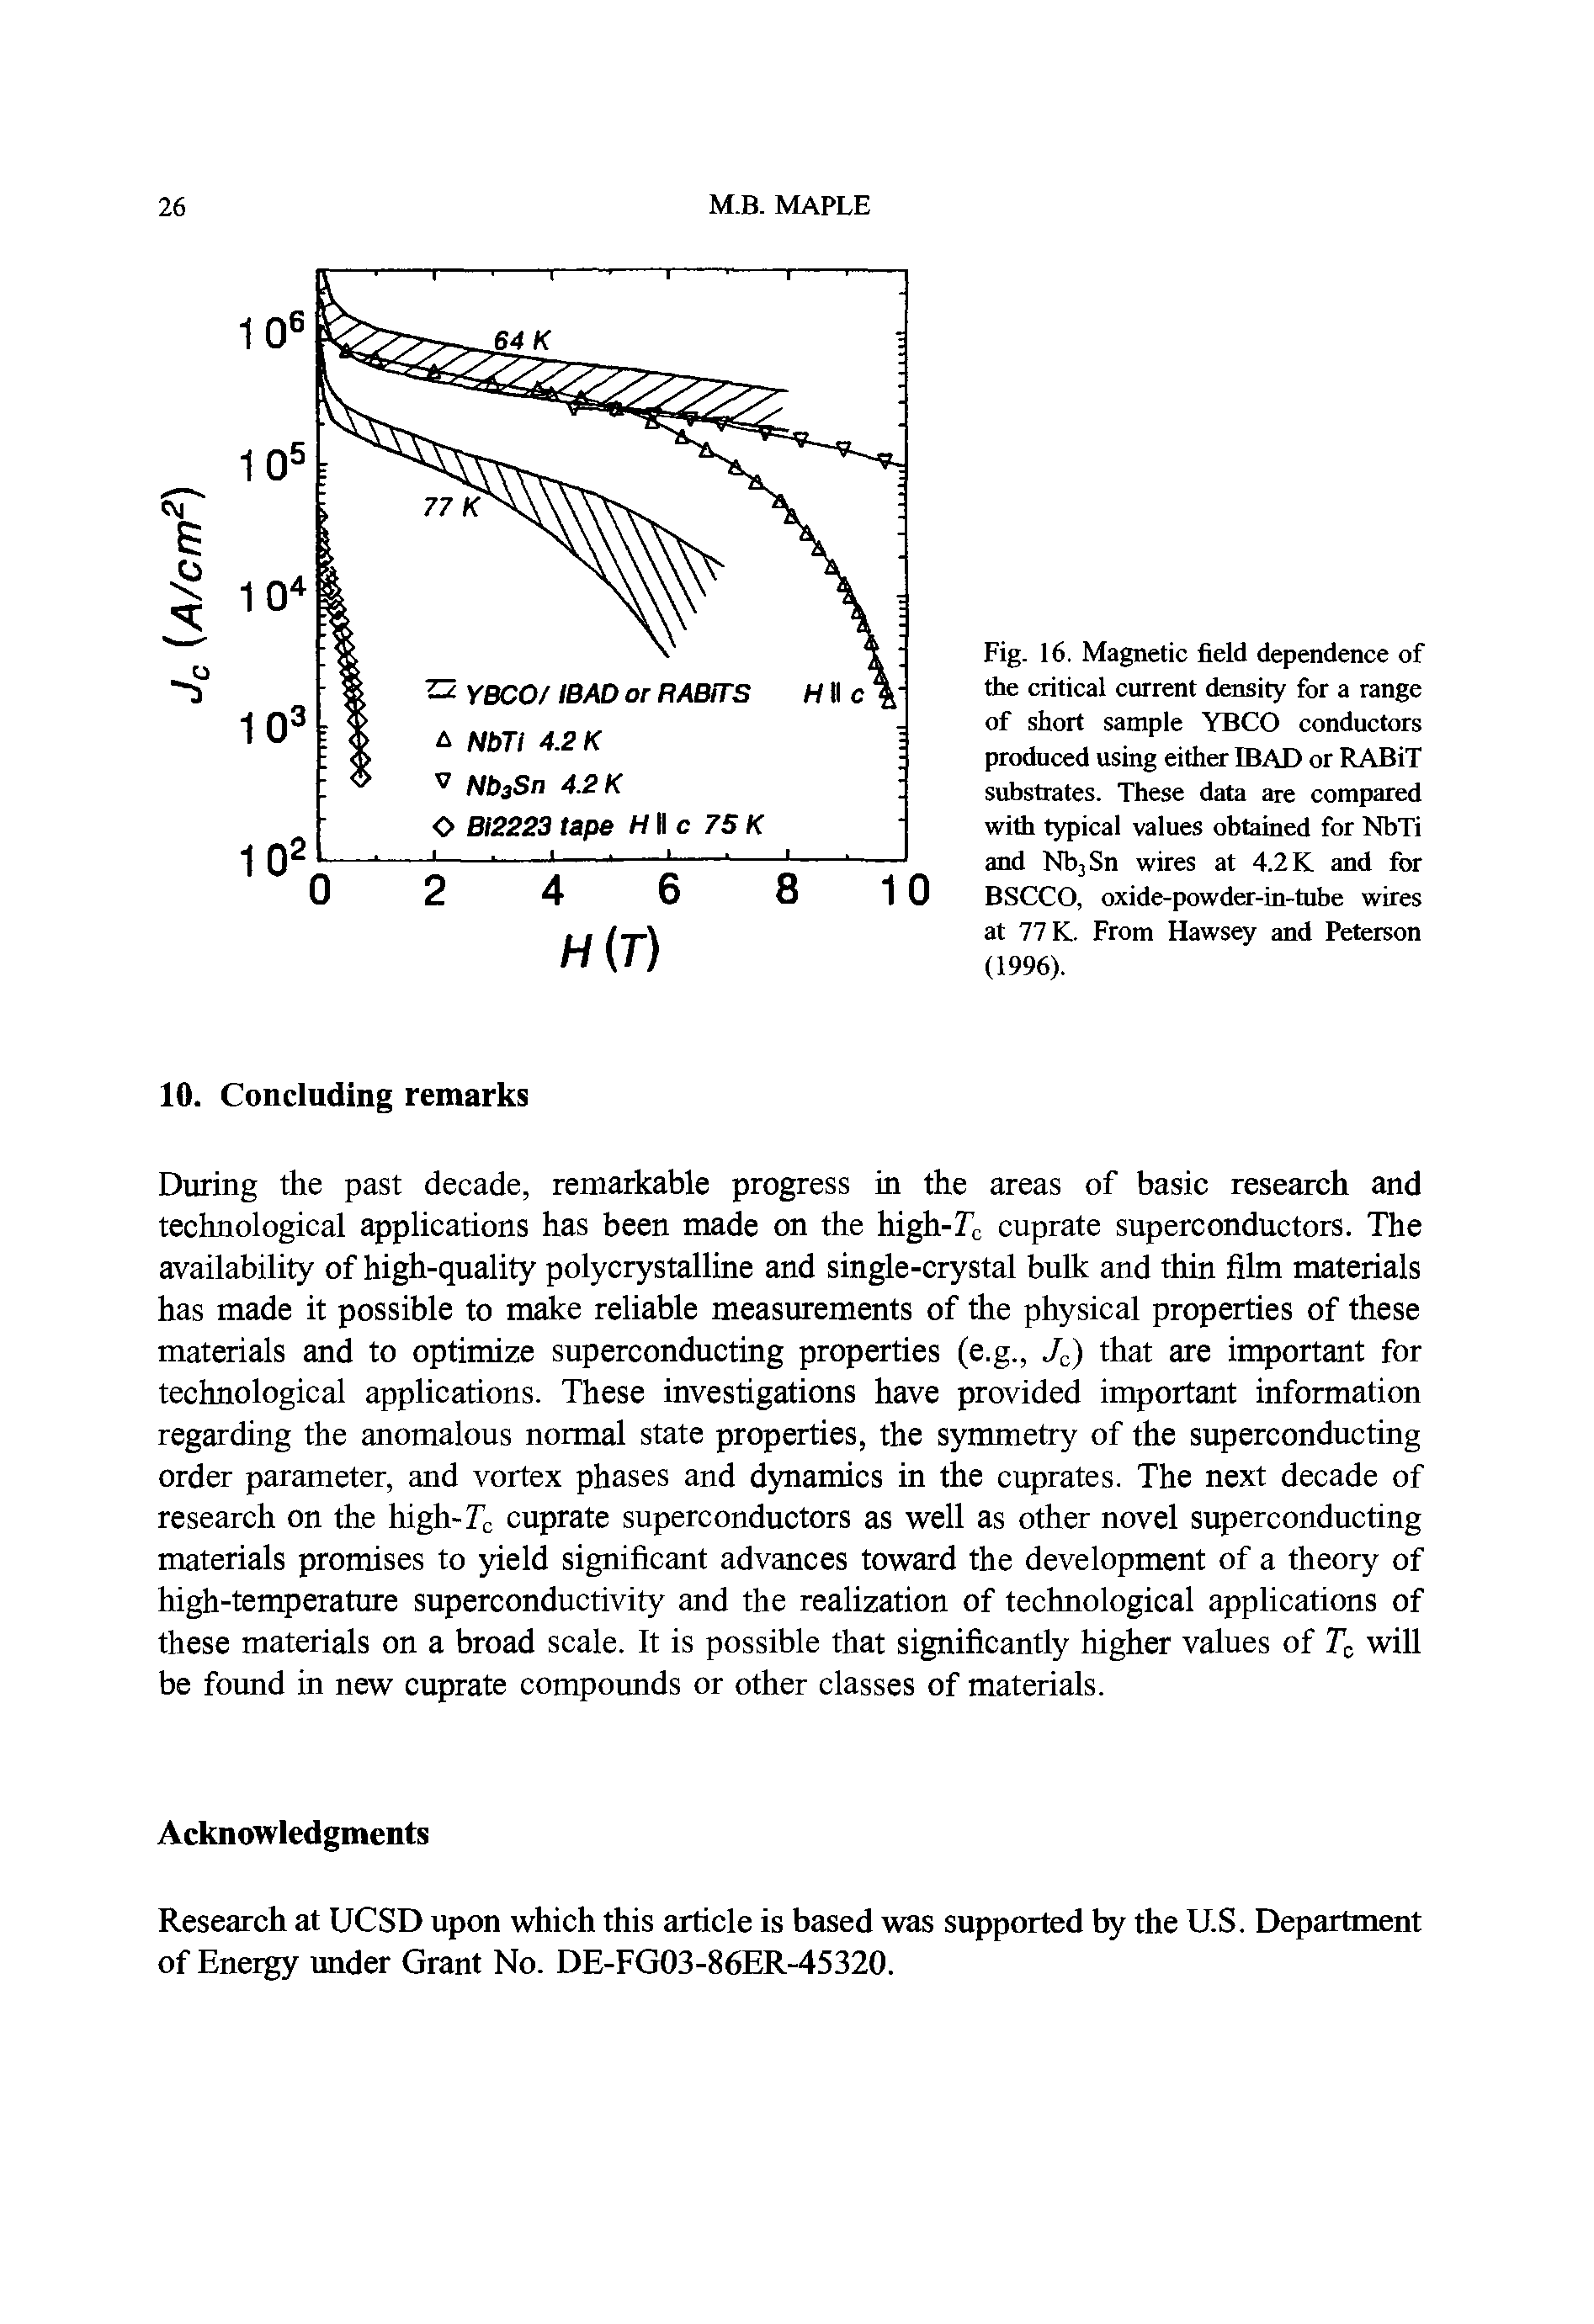 Fig. 16. Magnetic field dependence of the critical current density for a range of short sample YBCO conductors produced using either IBAD or RABiT substrates. These data are compared with typical values obtained for NbTi and Nb3Sn wires at 4.2 K and for BSCCO, oxide-powder-in-tube wires at 77 K. From Hawsqr and Peterson (1996).